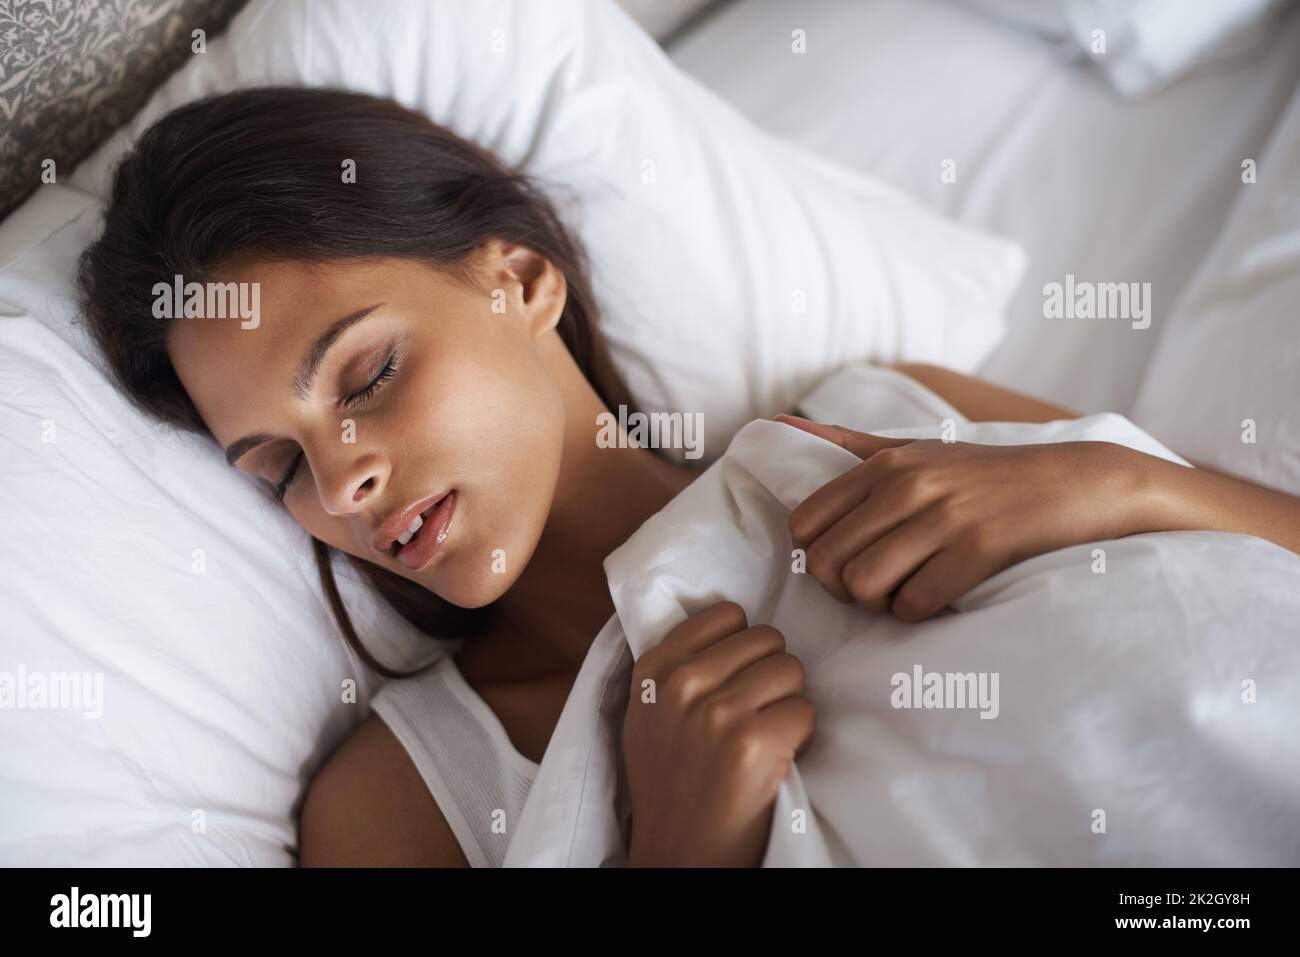 Far off in dream land. A beautiful young woman sleeping in her bed. Stock Photo